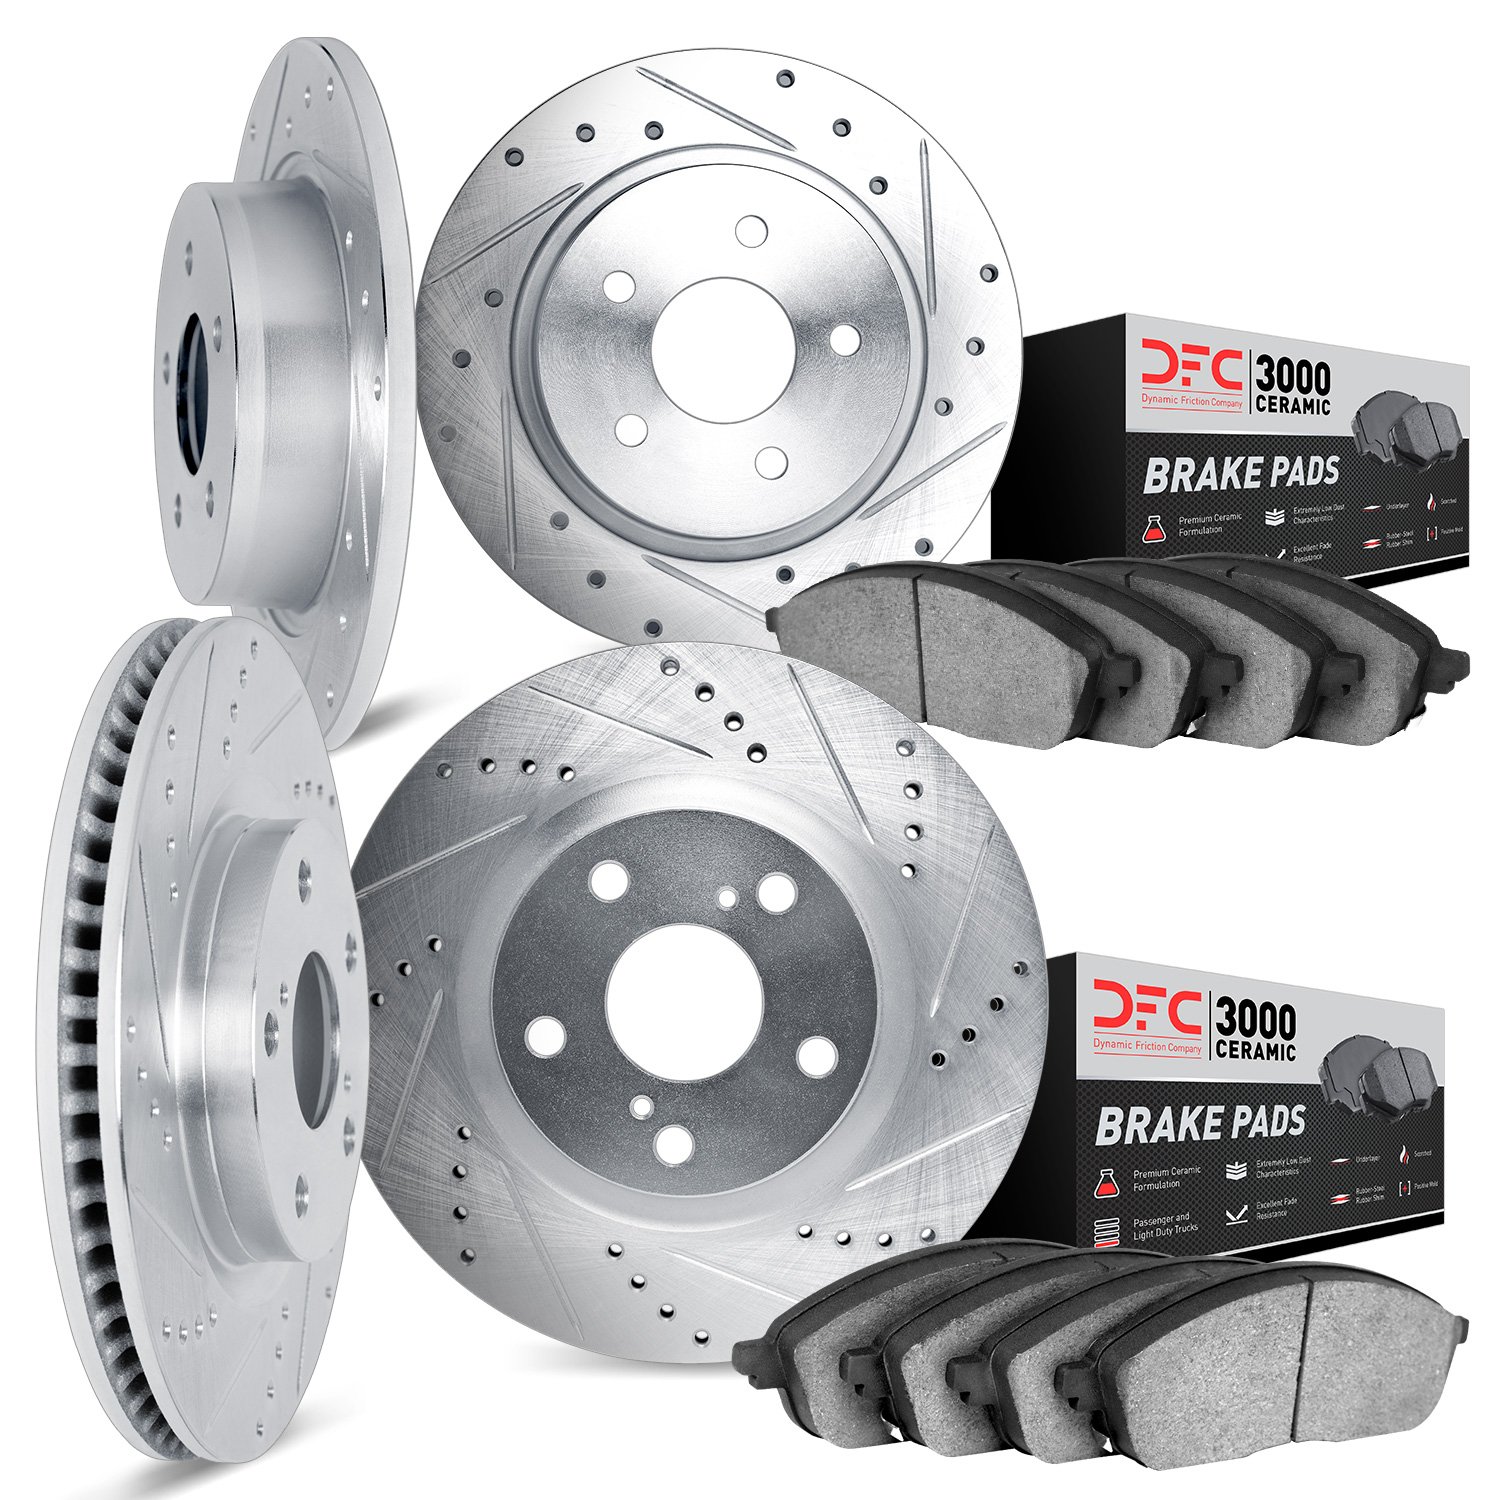 7304-40018 Drilled/Slotted Brake Rotor with 3000-Series Ceramic Brake Pads Kit [Silver], 1998-2000 Mopar, Position: Front and Re